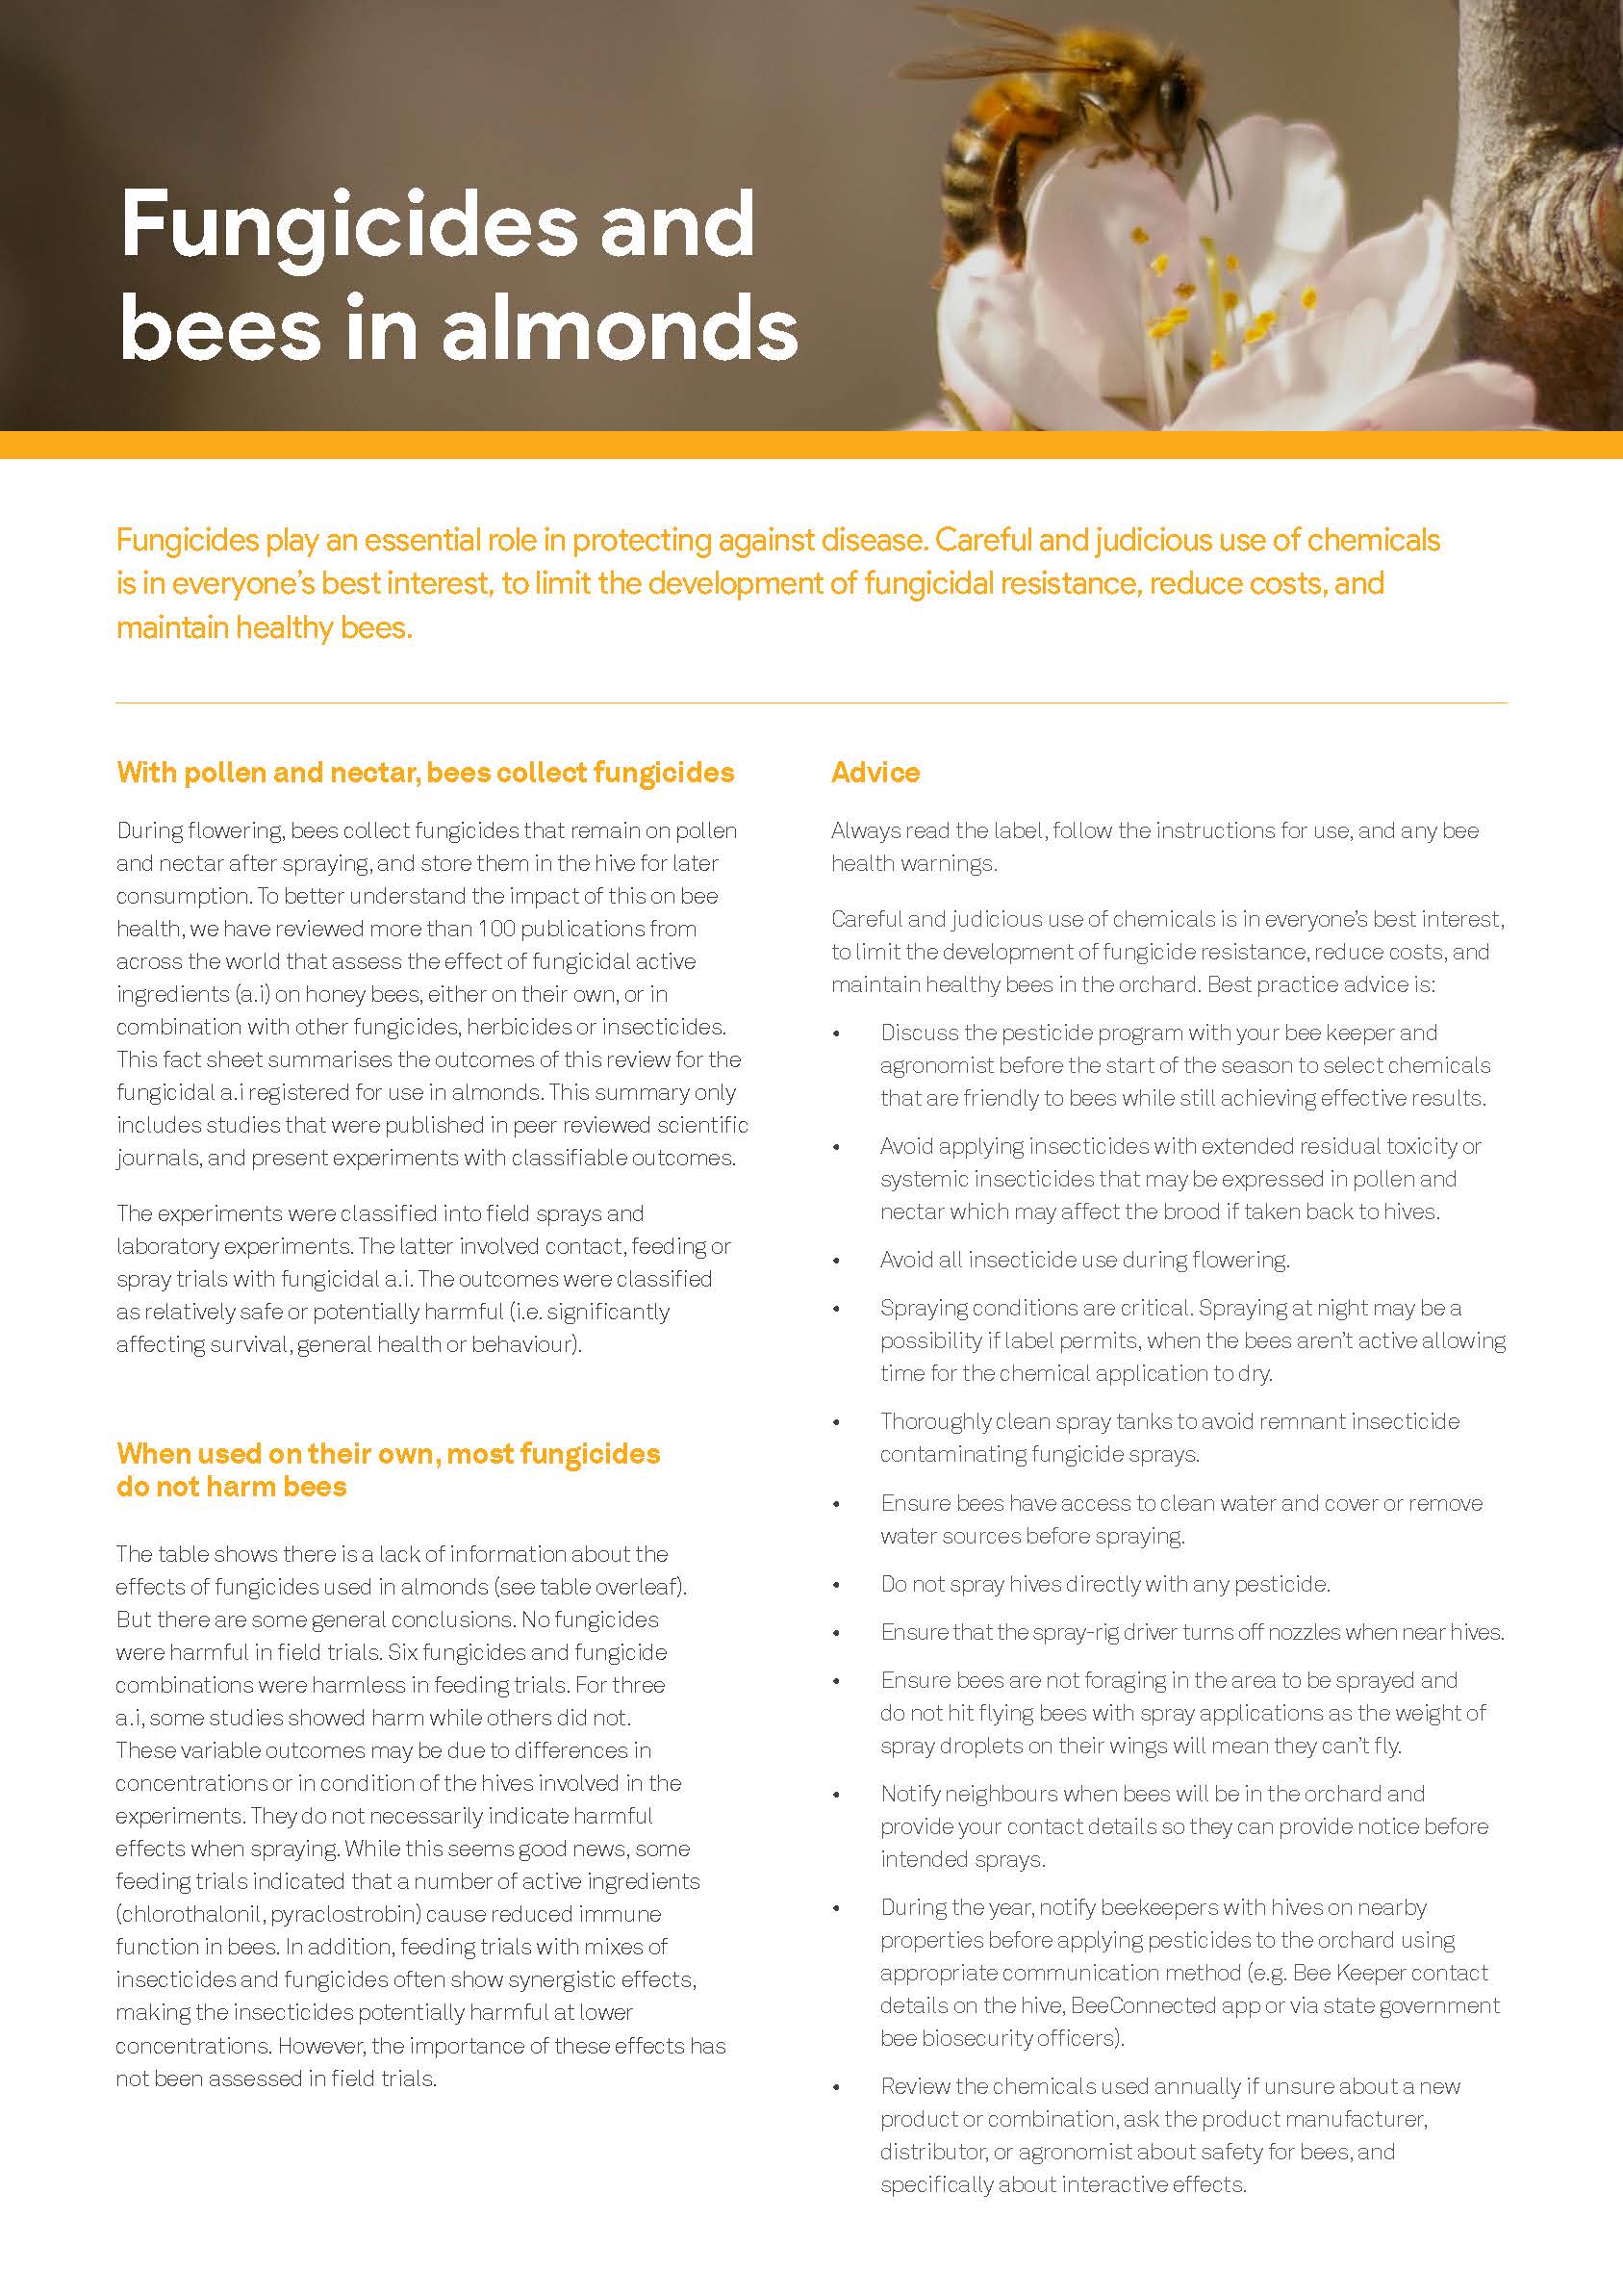 Fungicides and bees in almonds - image